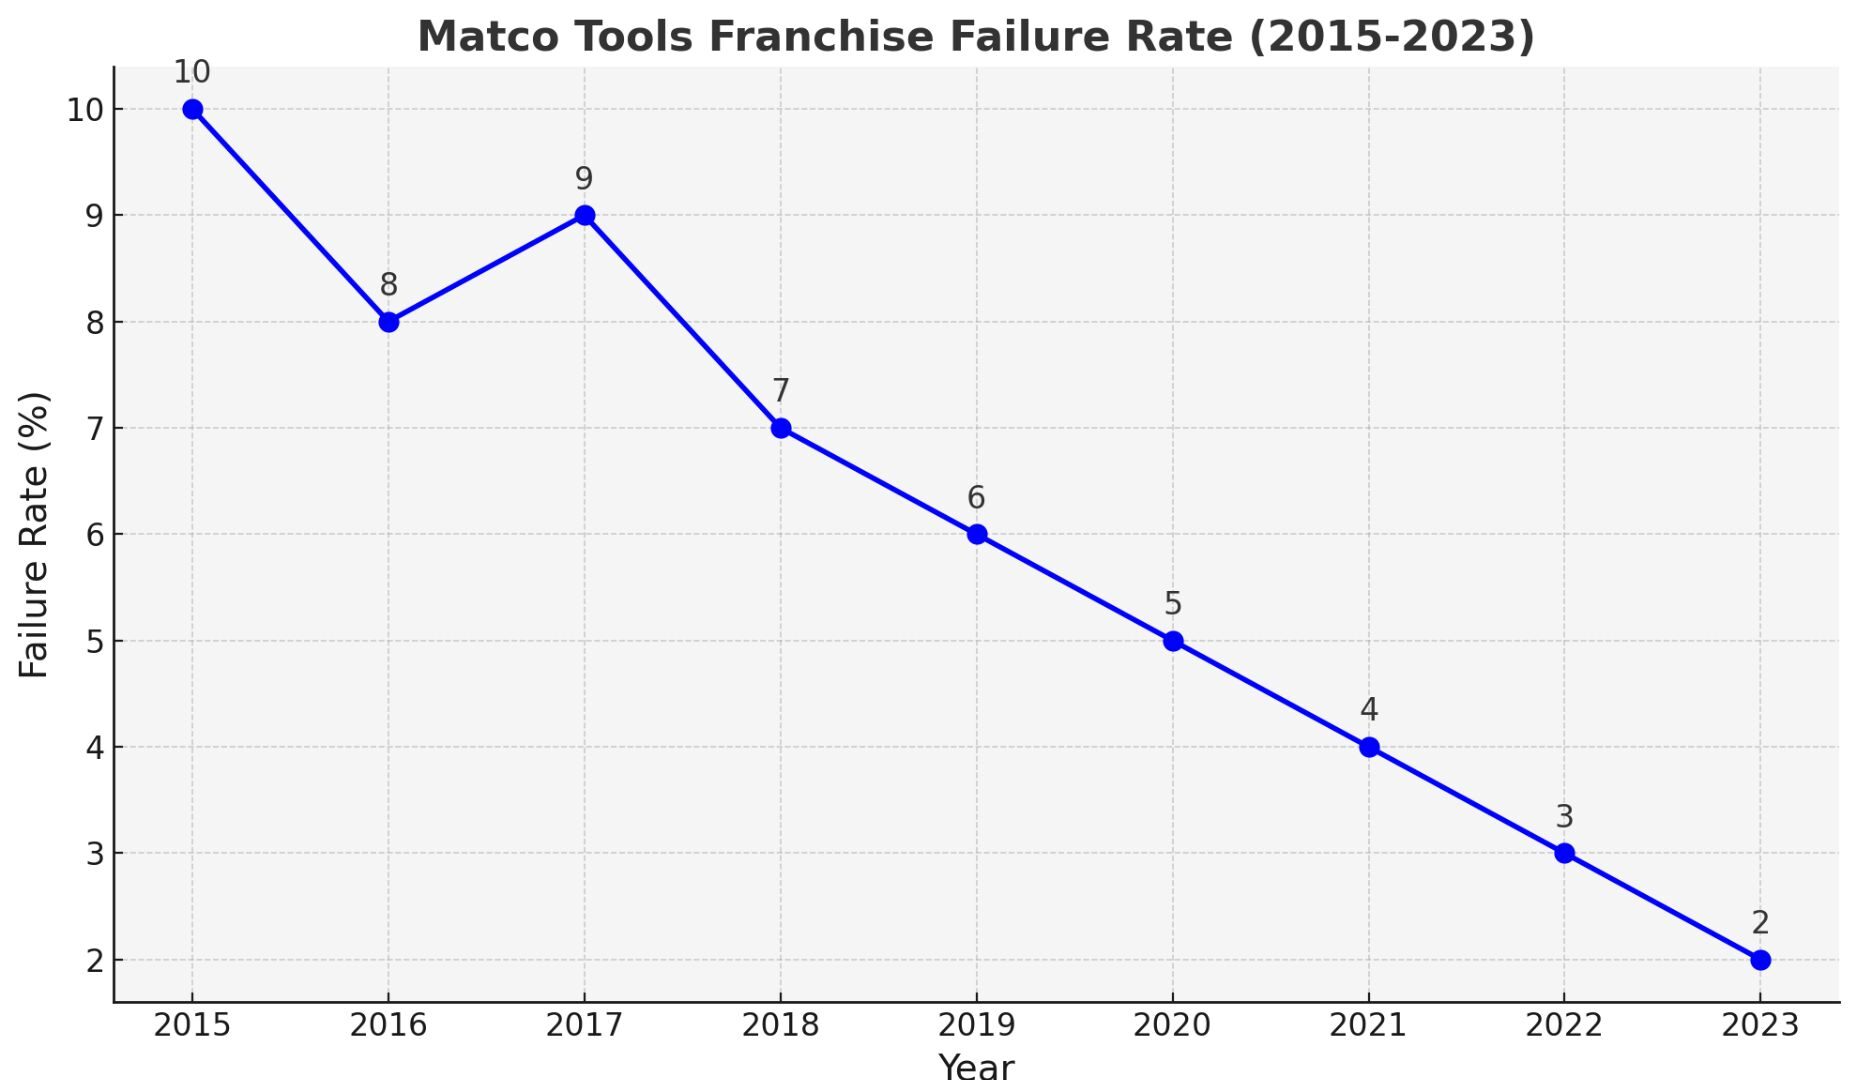 Matco Franchise Failure Rate graph of last 9 years